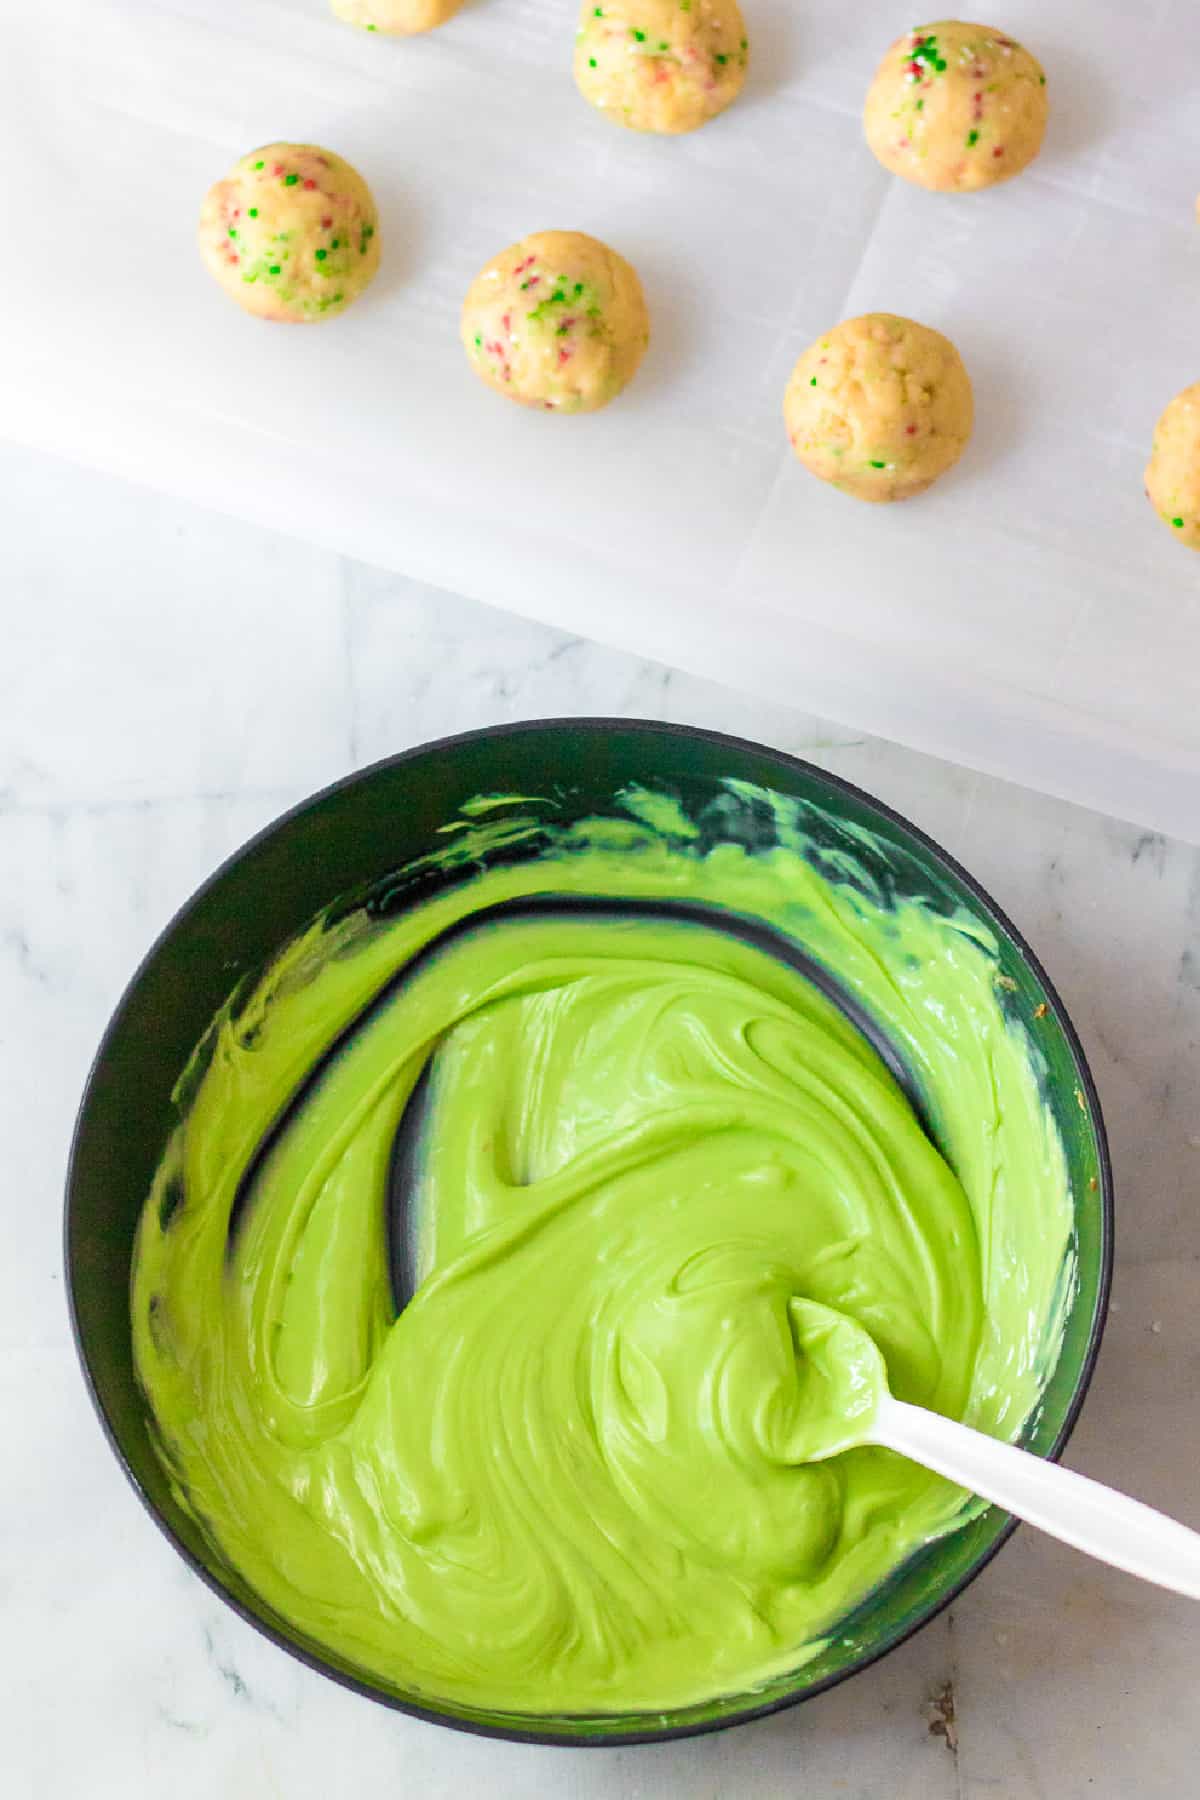 Bright green melting wafers melted in a bowl with a spoon withgolden Oreo truffles on parchment paper nearby.